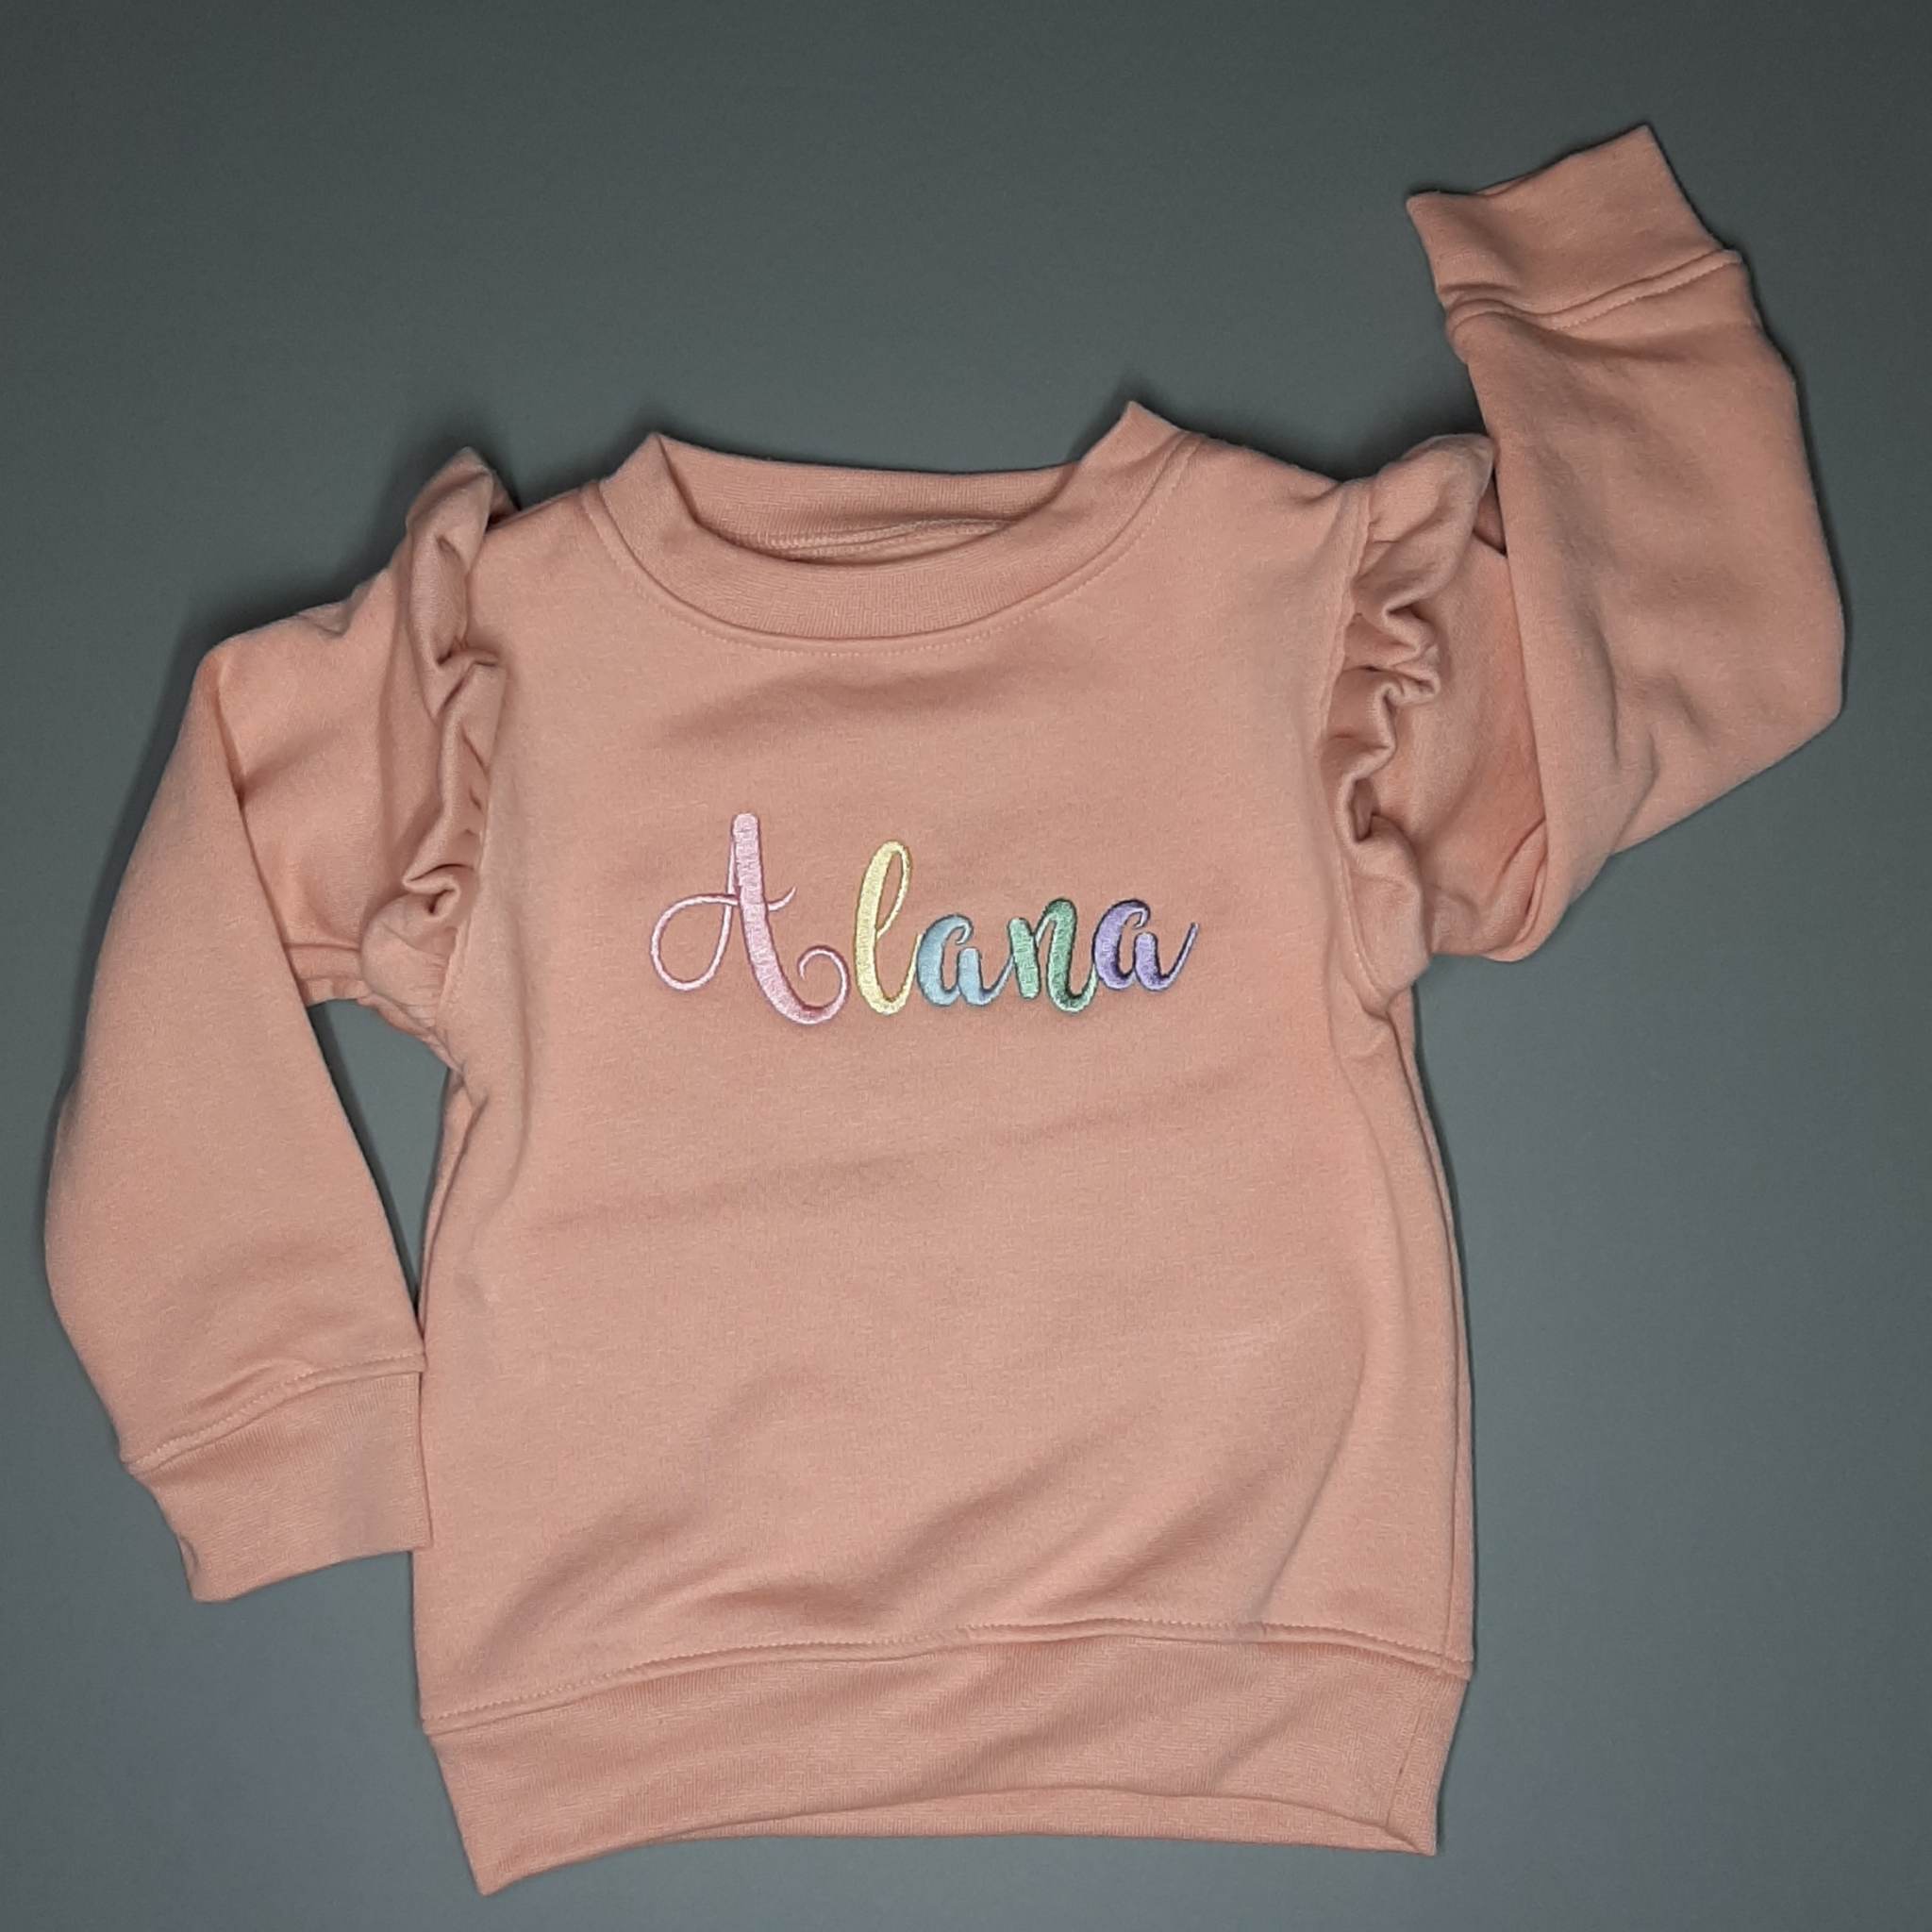 Rainbow Name Children's T Shirt/Jumper, chunky embroidered name in pastel rainbow colours